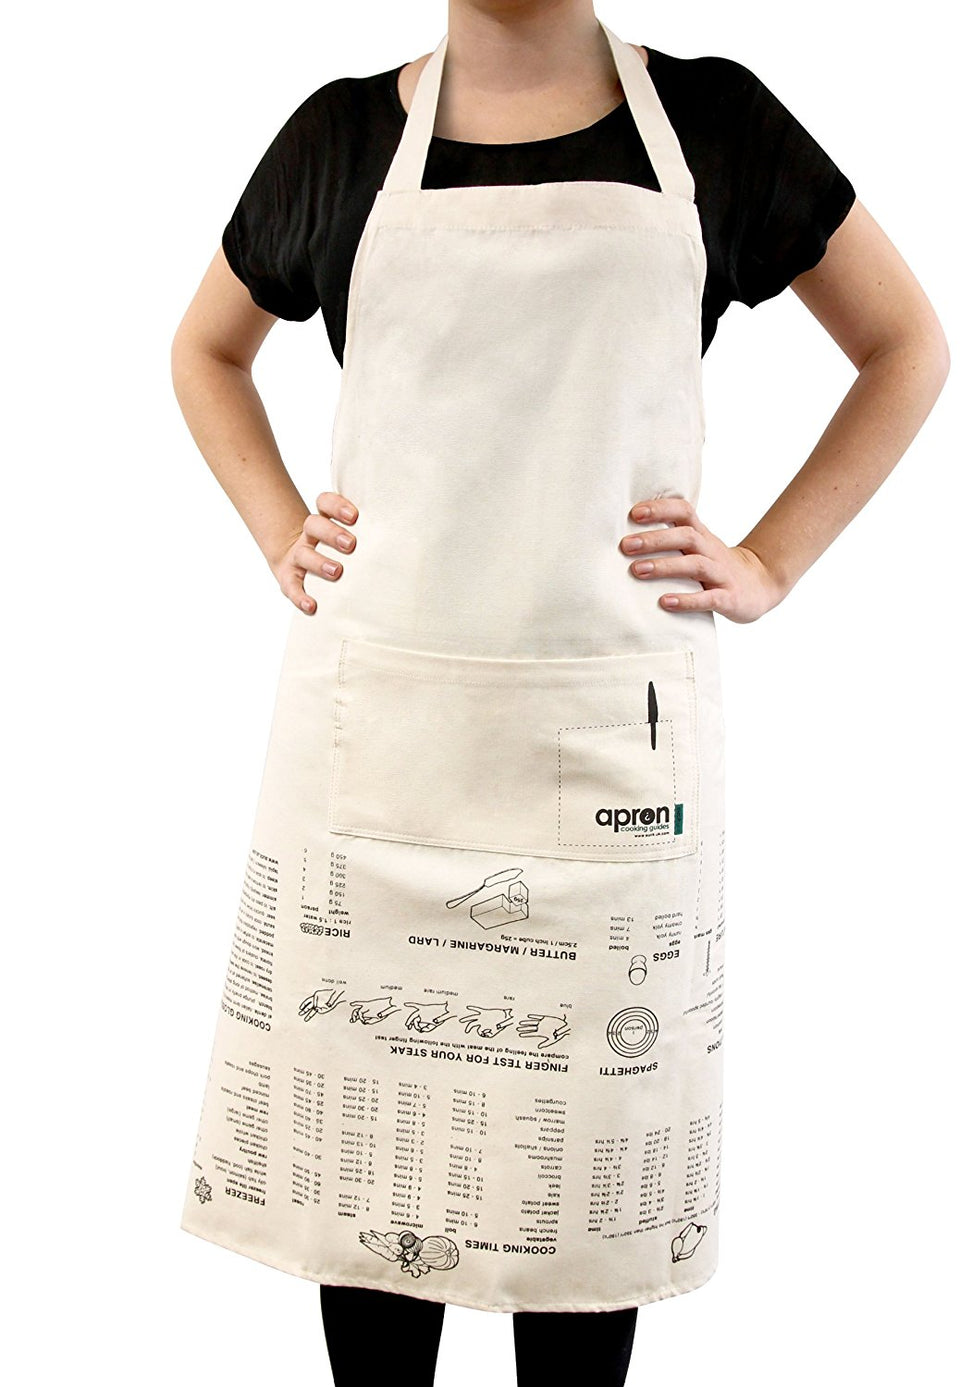 Apron Cooking Guide - Full Apron